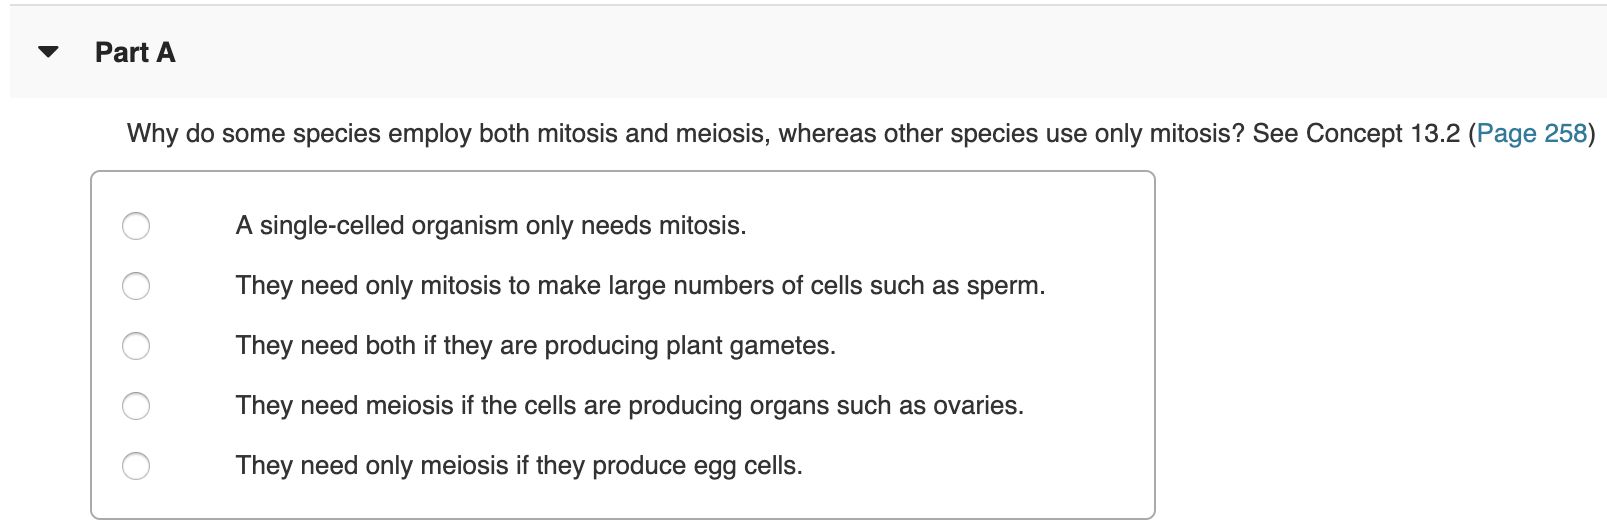 Why do some species employ both mitosis and meiosis